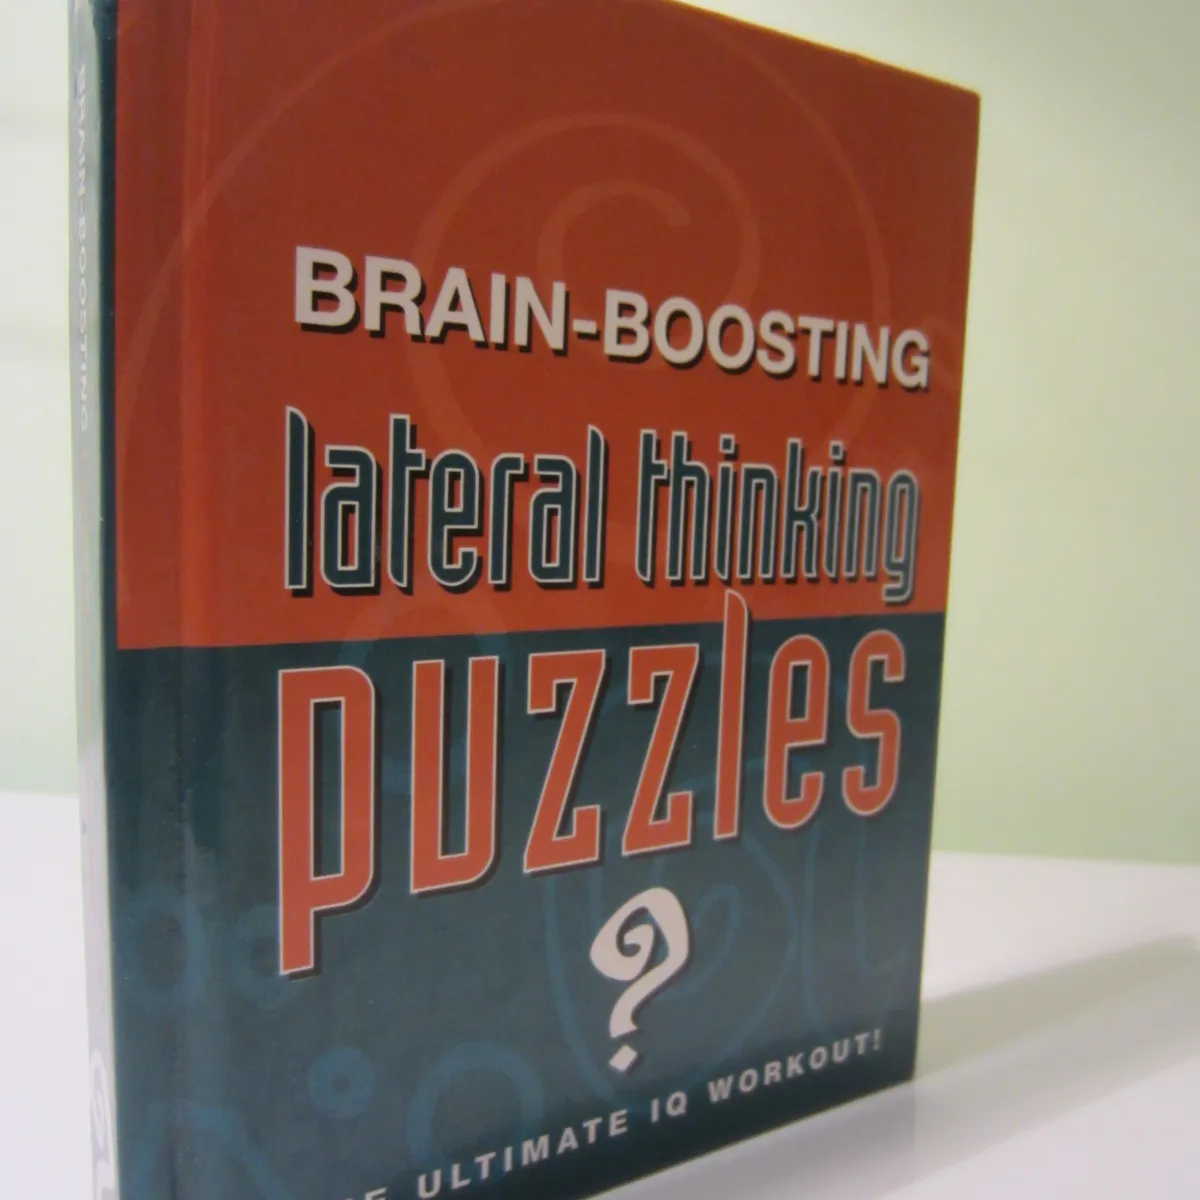 Boost your Brain Power with Brain-Boosting Lateral Thinking P... photo 1